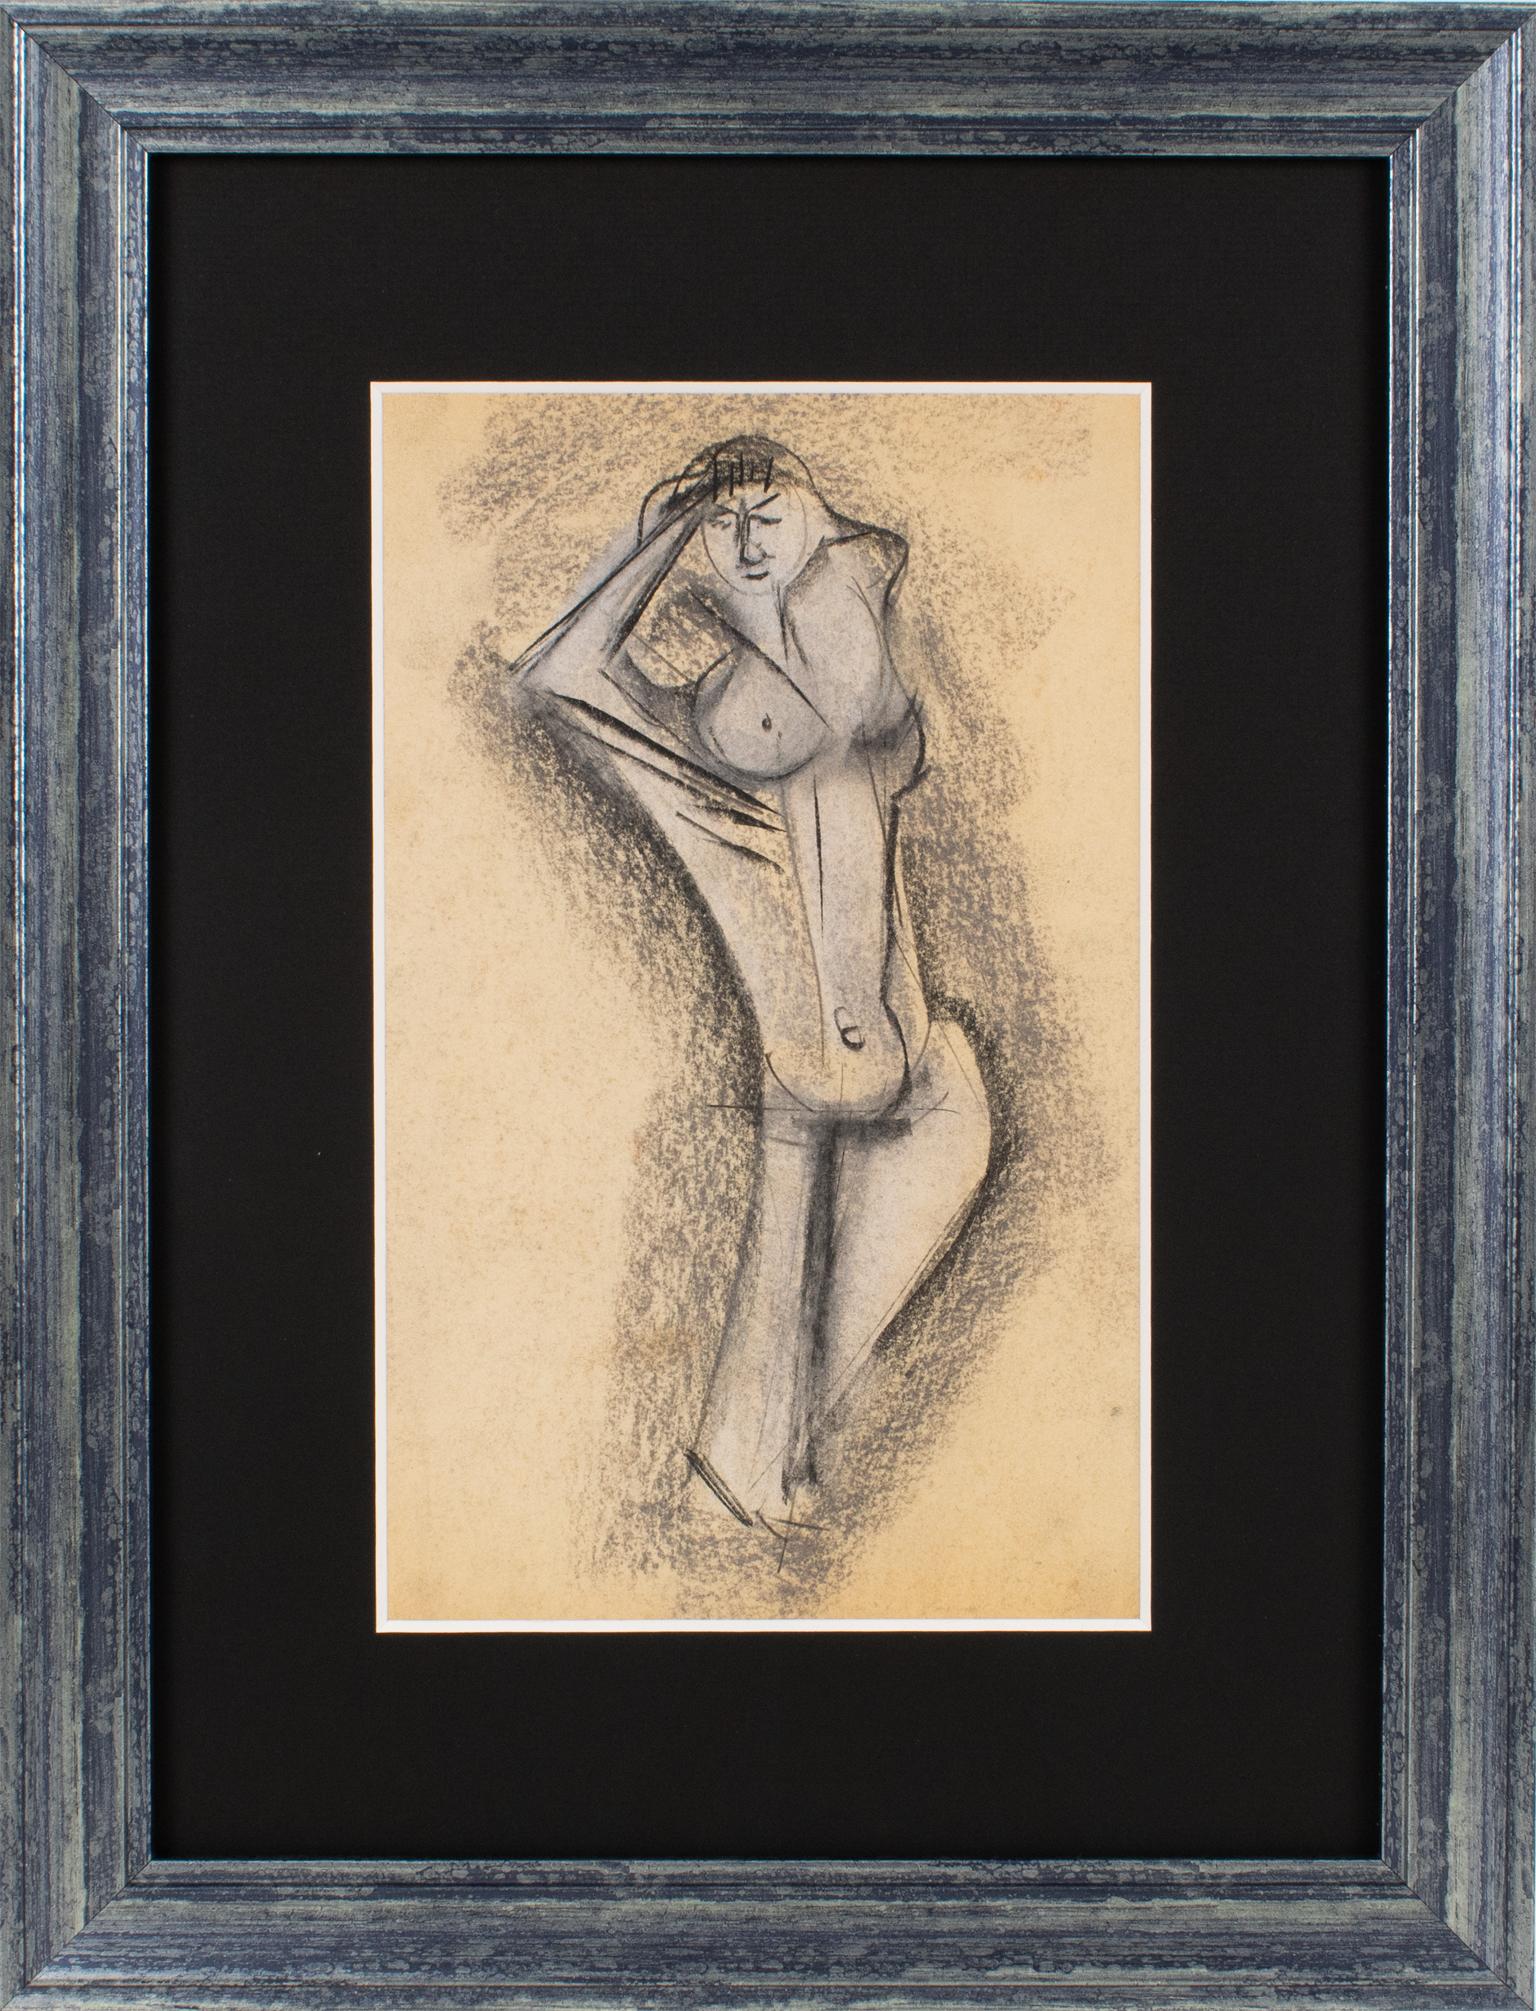 Cubist Nude Pastel Study Painting by John Begg